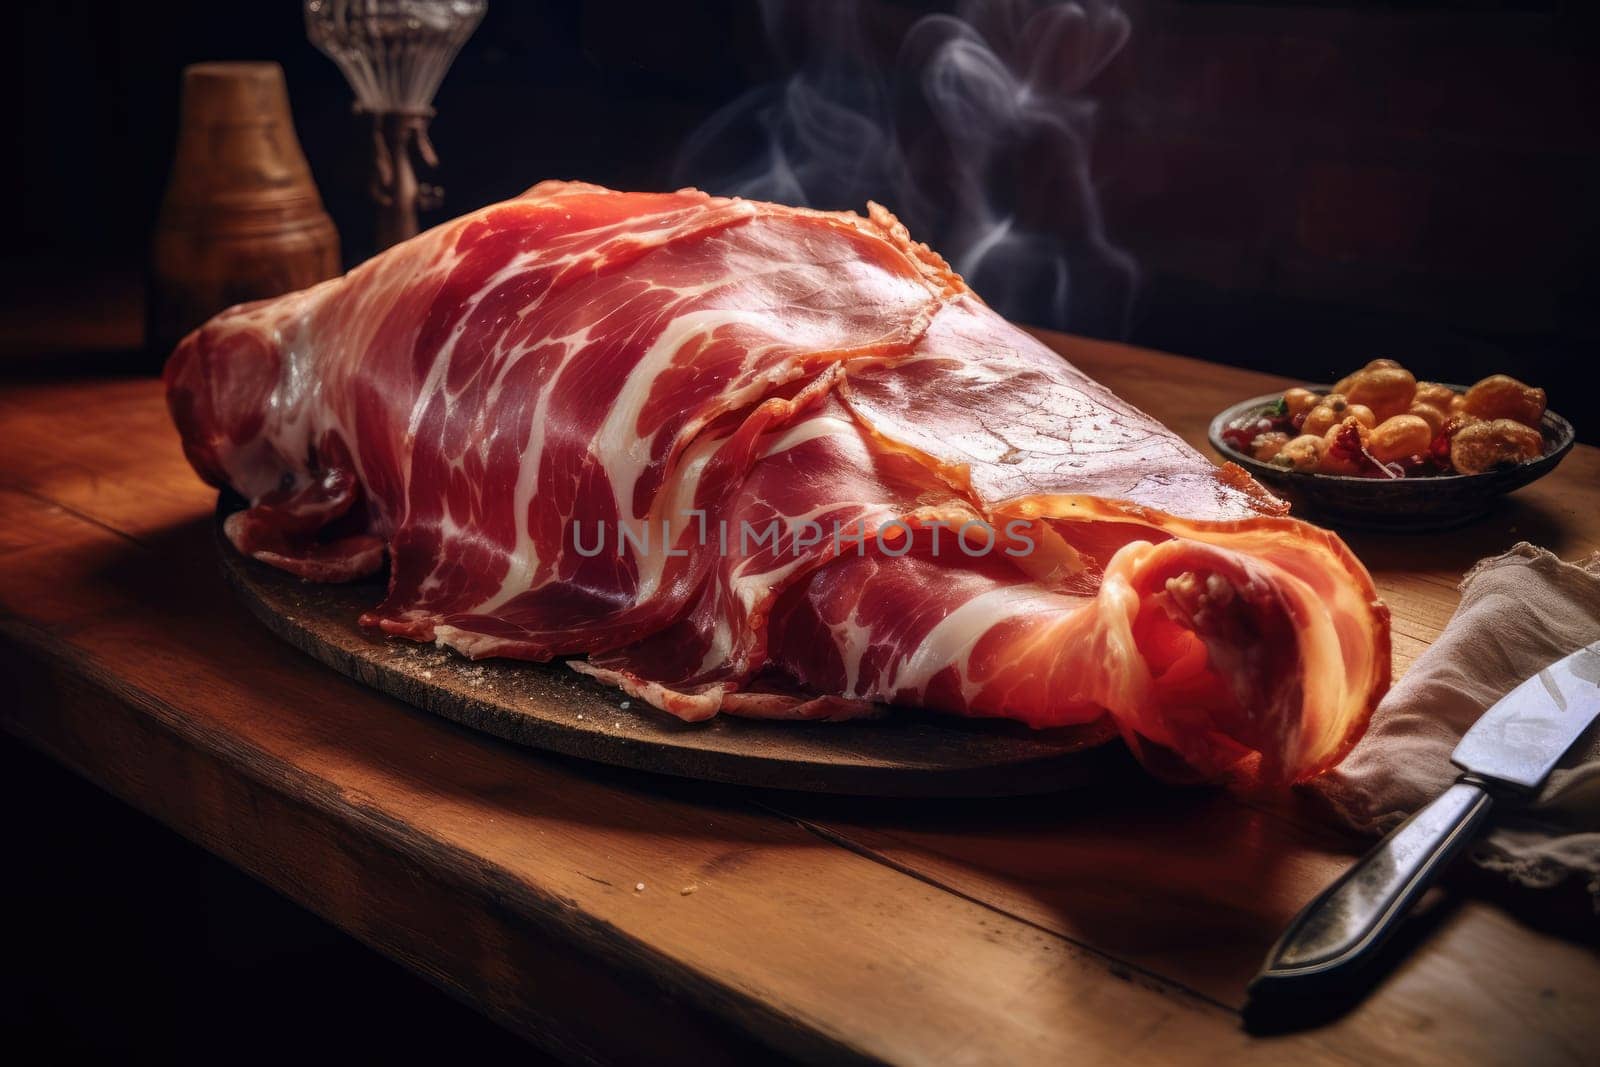 Food concept. Cured pork leg of jamon with thin slices of meat jamon on a wooden table on a black background. Delicious shot with bacon. Close-up. With haze.